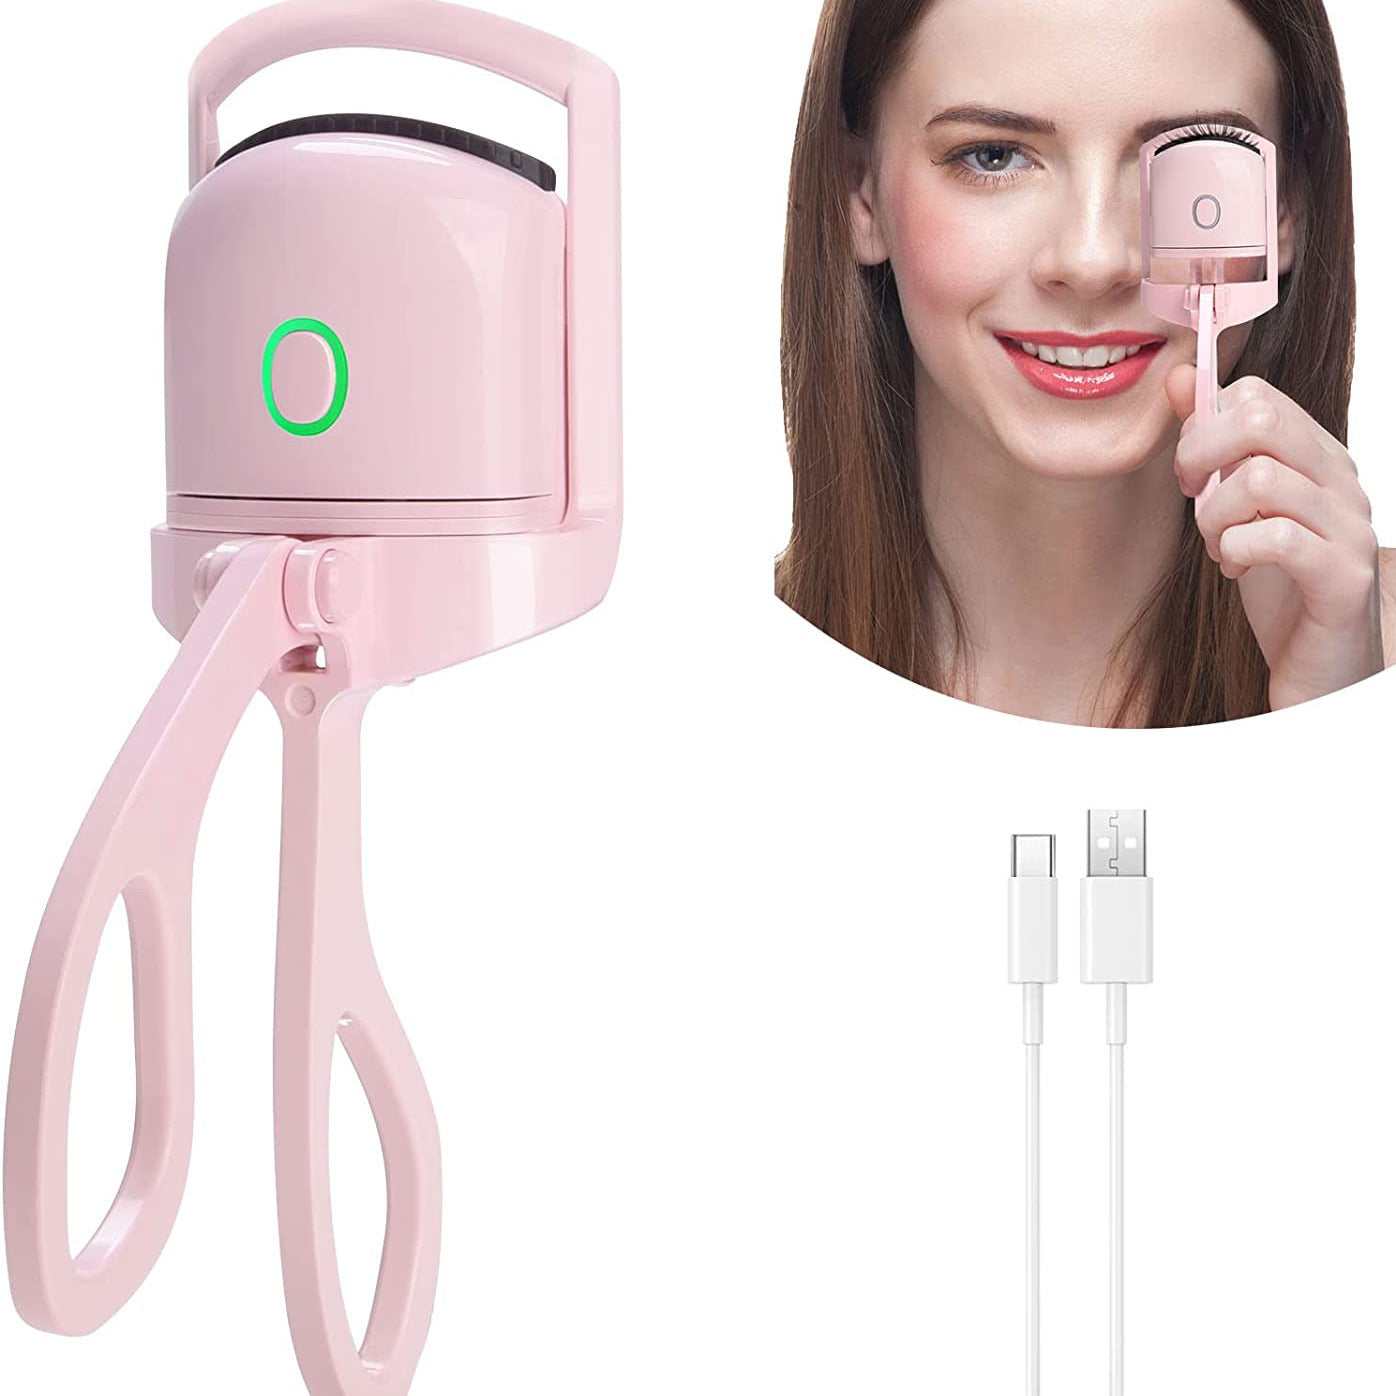 Heated Eyelash Curlers, Rechargeable Electric Eyelash Curler Quick Natural Curling 2 Temperature Modes Heated Lash Curling Long Lasting Lash Tool